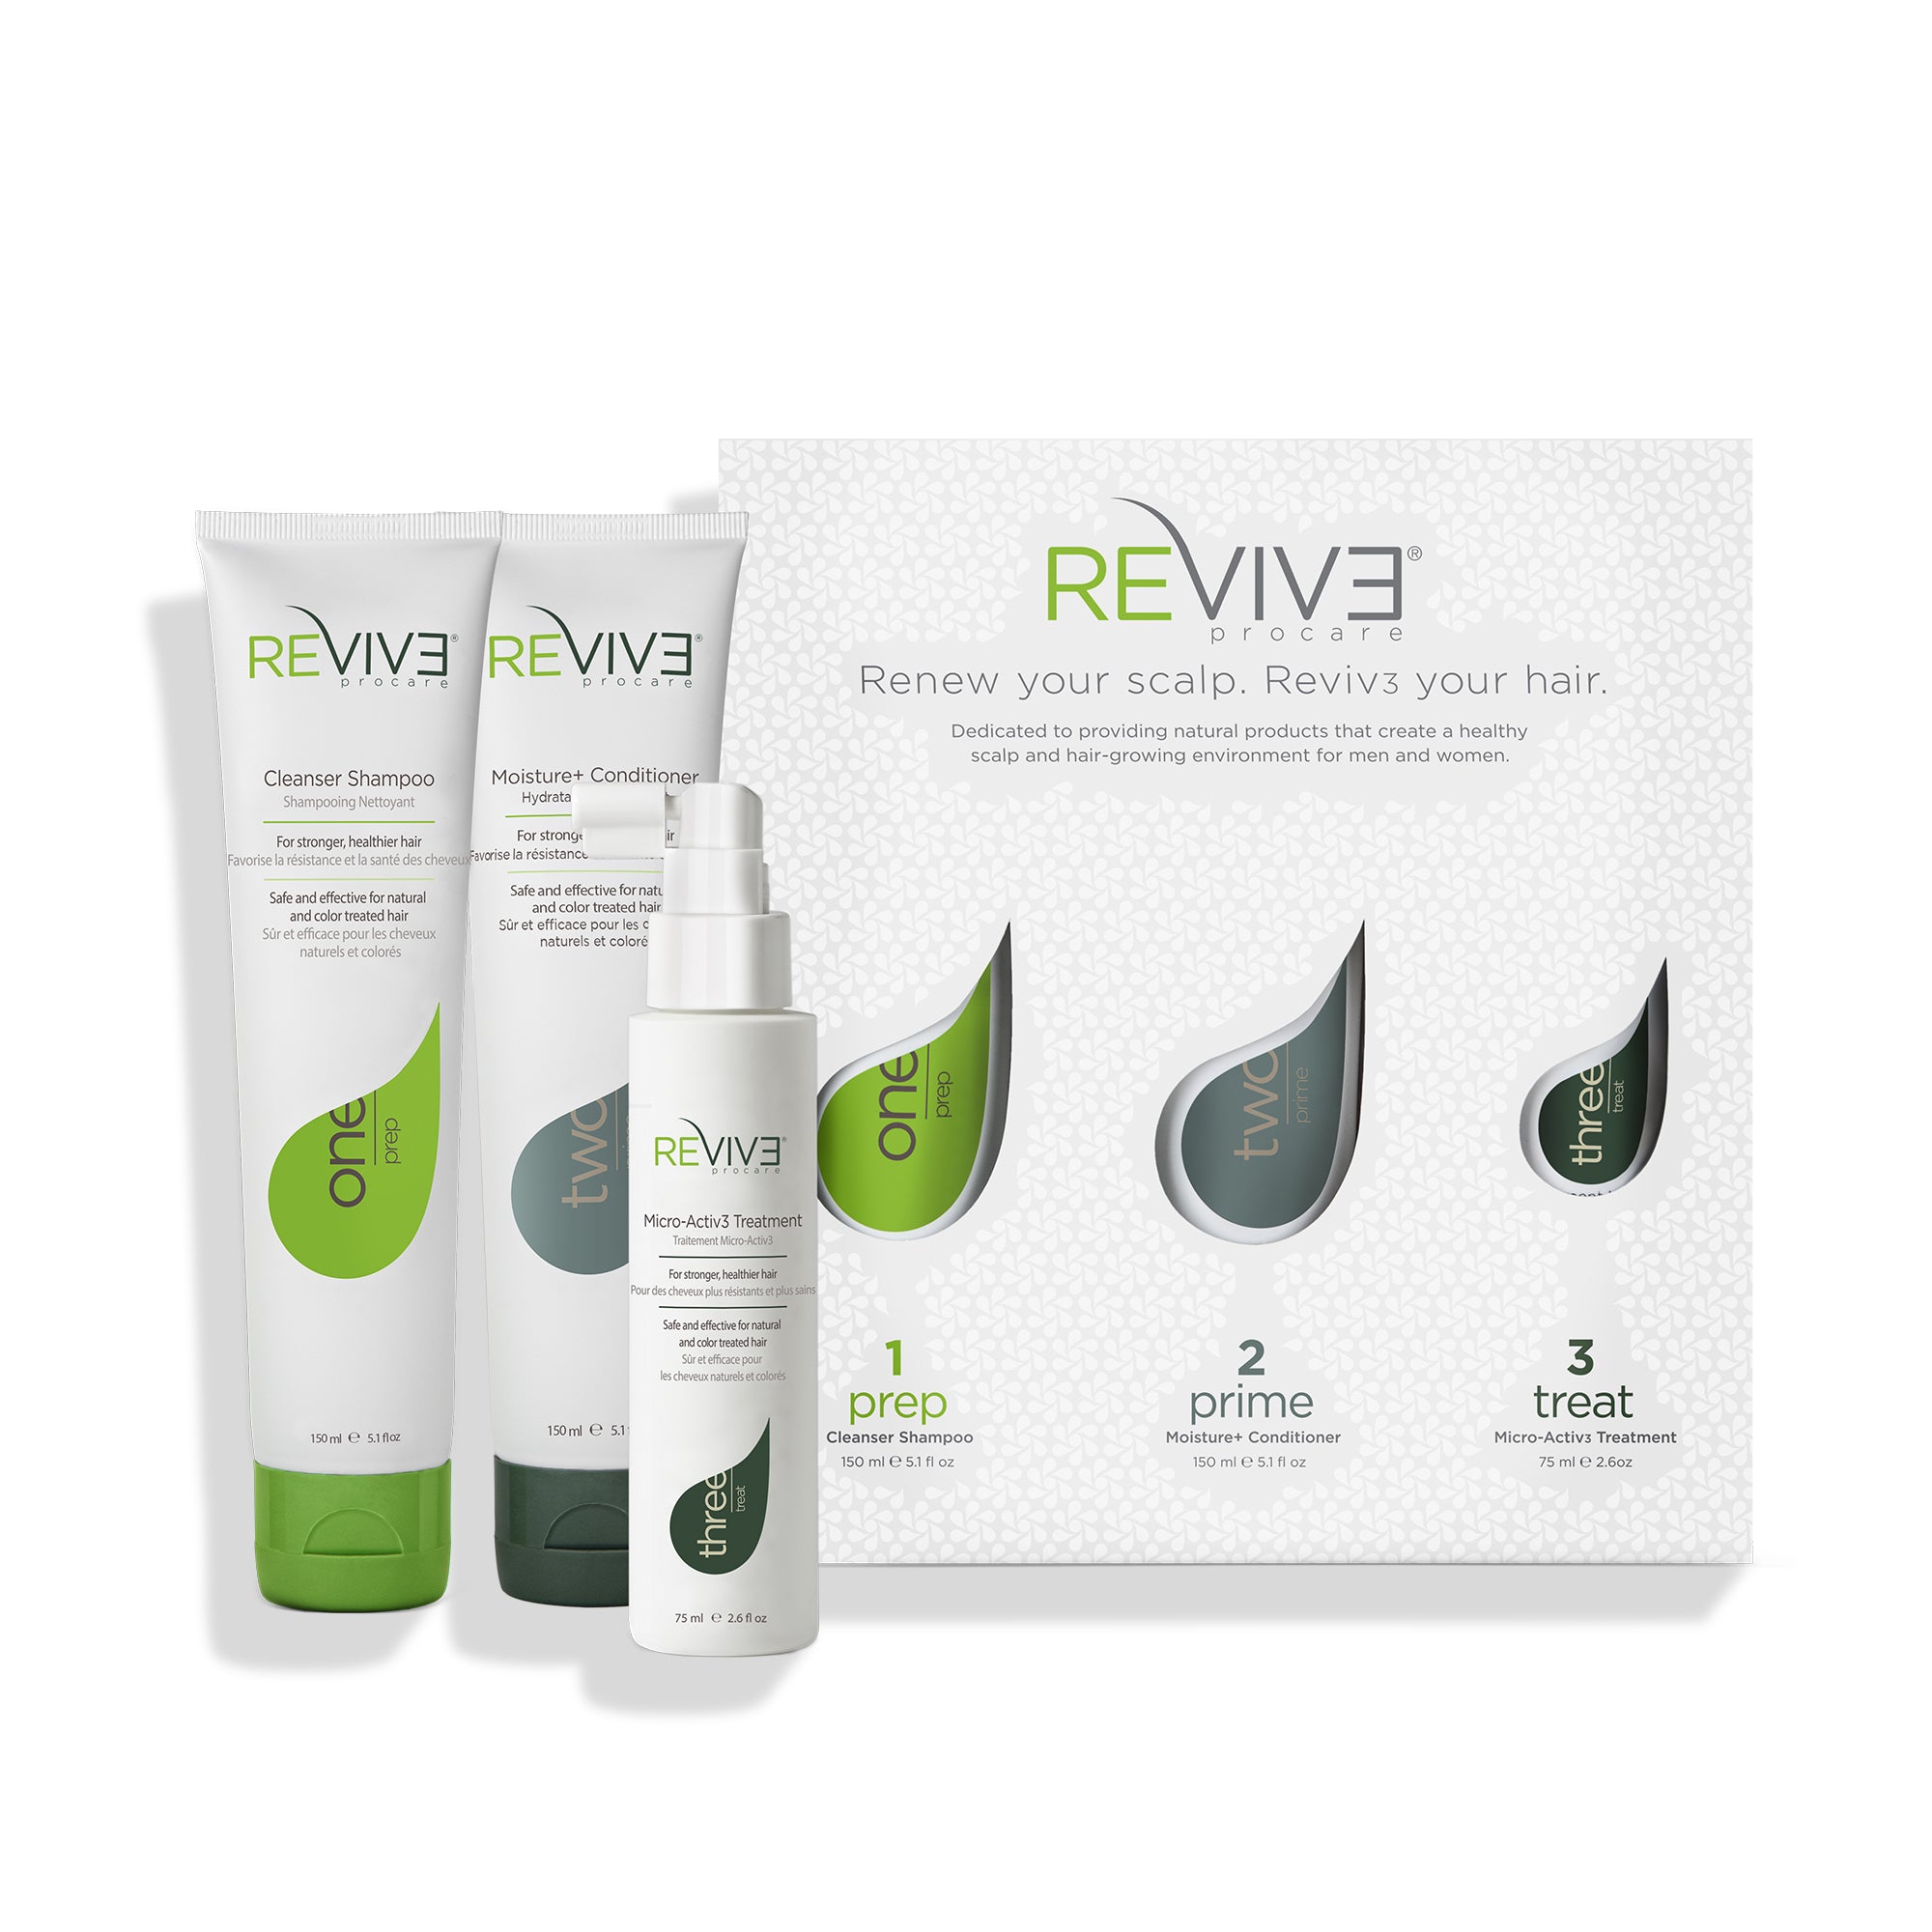 Revive and Thrive: Restorative Hair Care Practices for Women